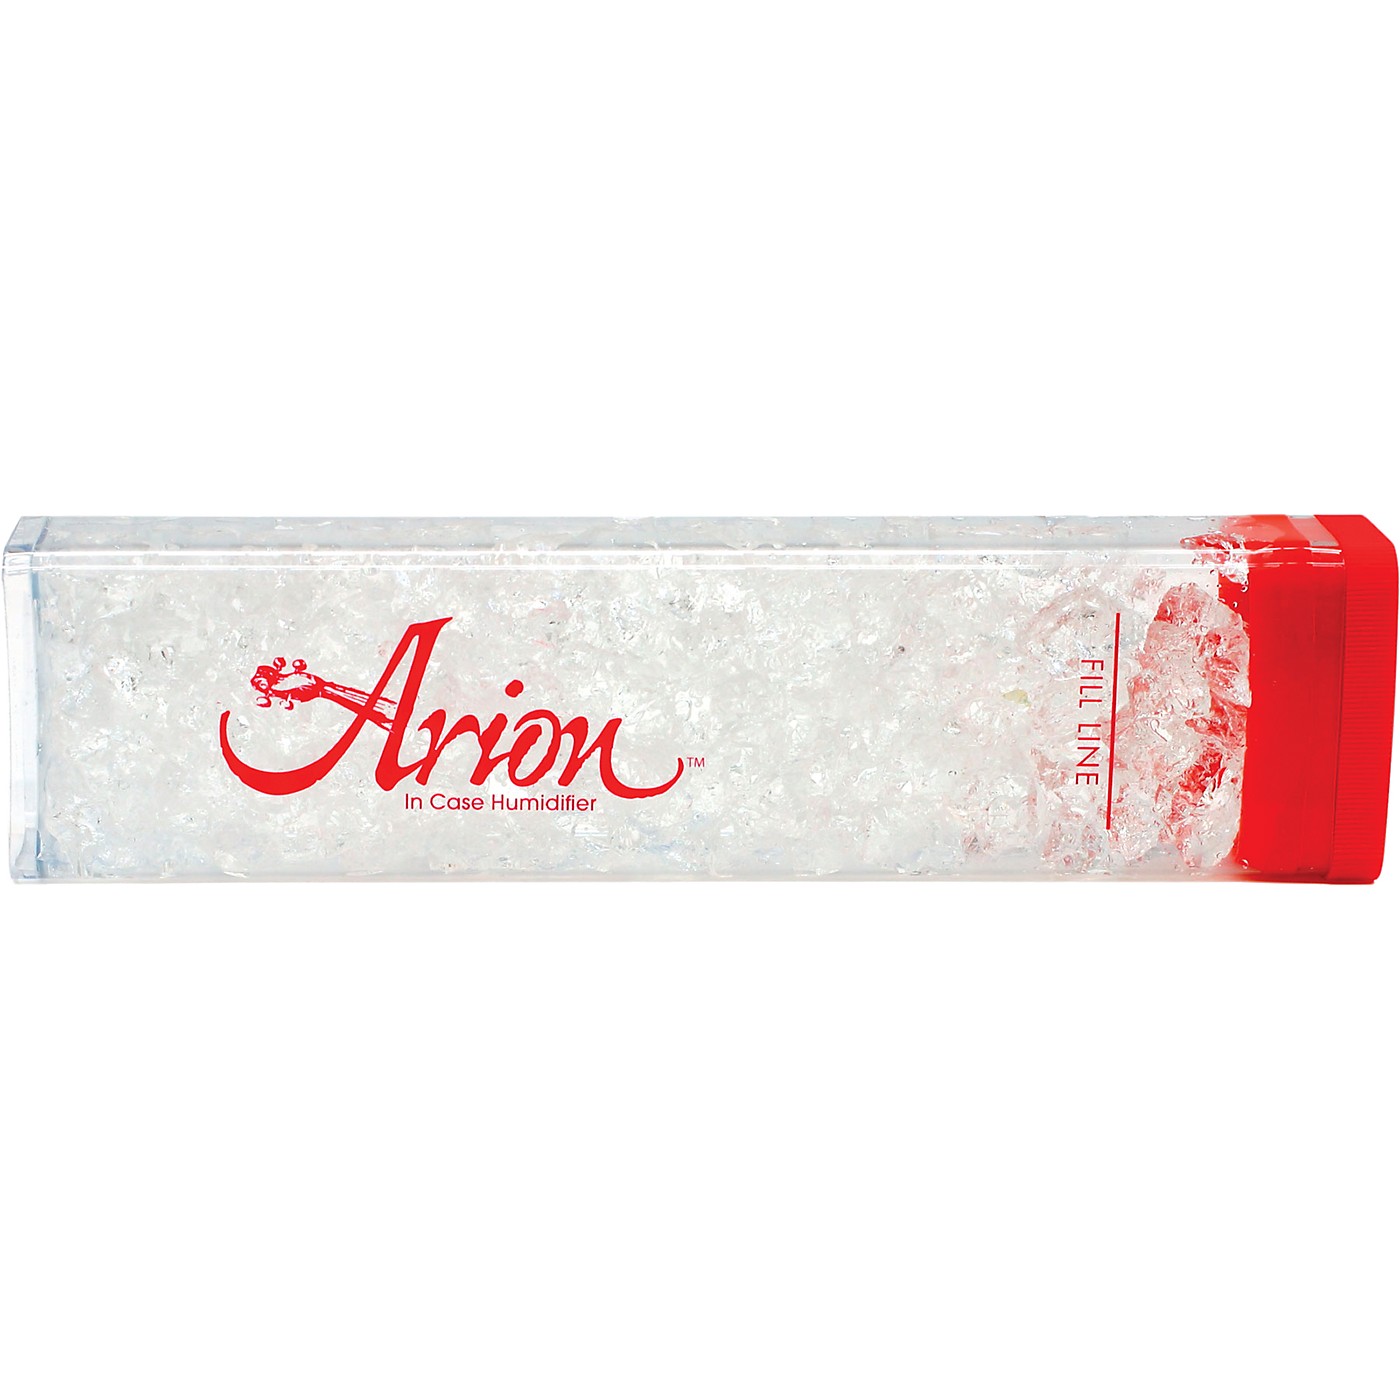 Arion Humidifier In Case Humidifier thumbnail